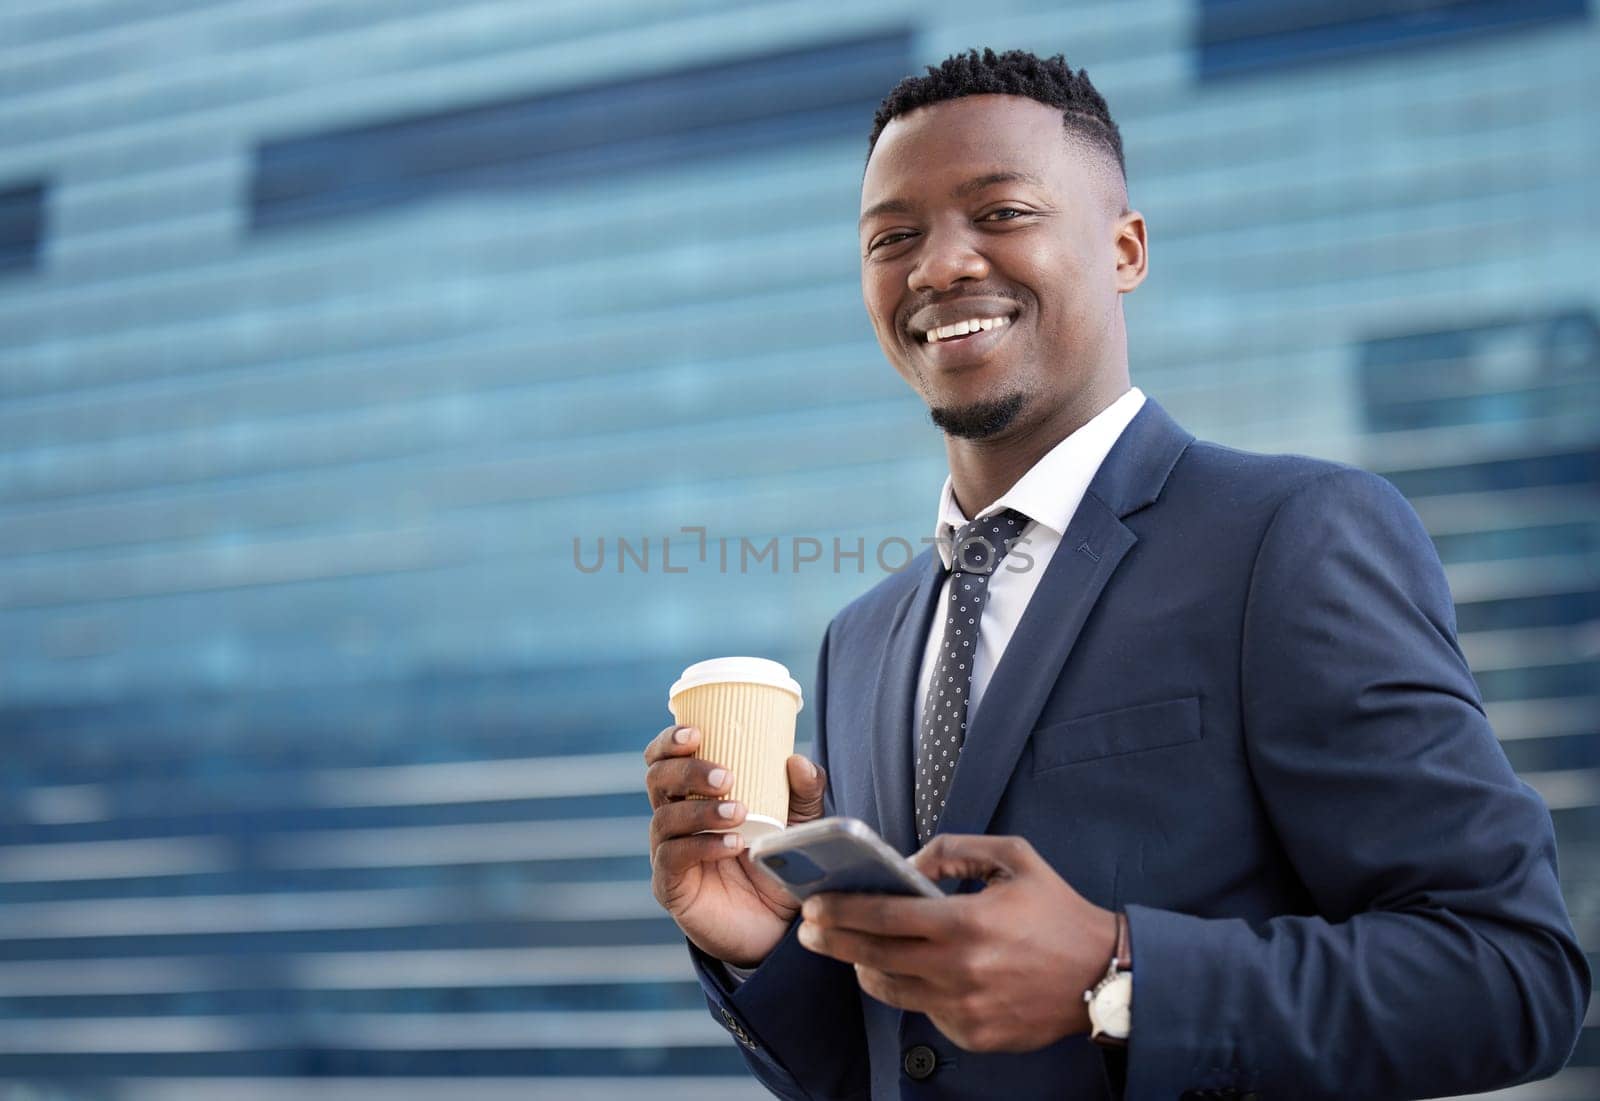 Black man, business and coffee with phone in portrait for schedule or networking as manager with digital technology. Happy, male person and mobile device for research on project proposal for work.